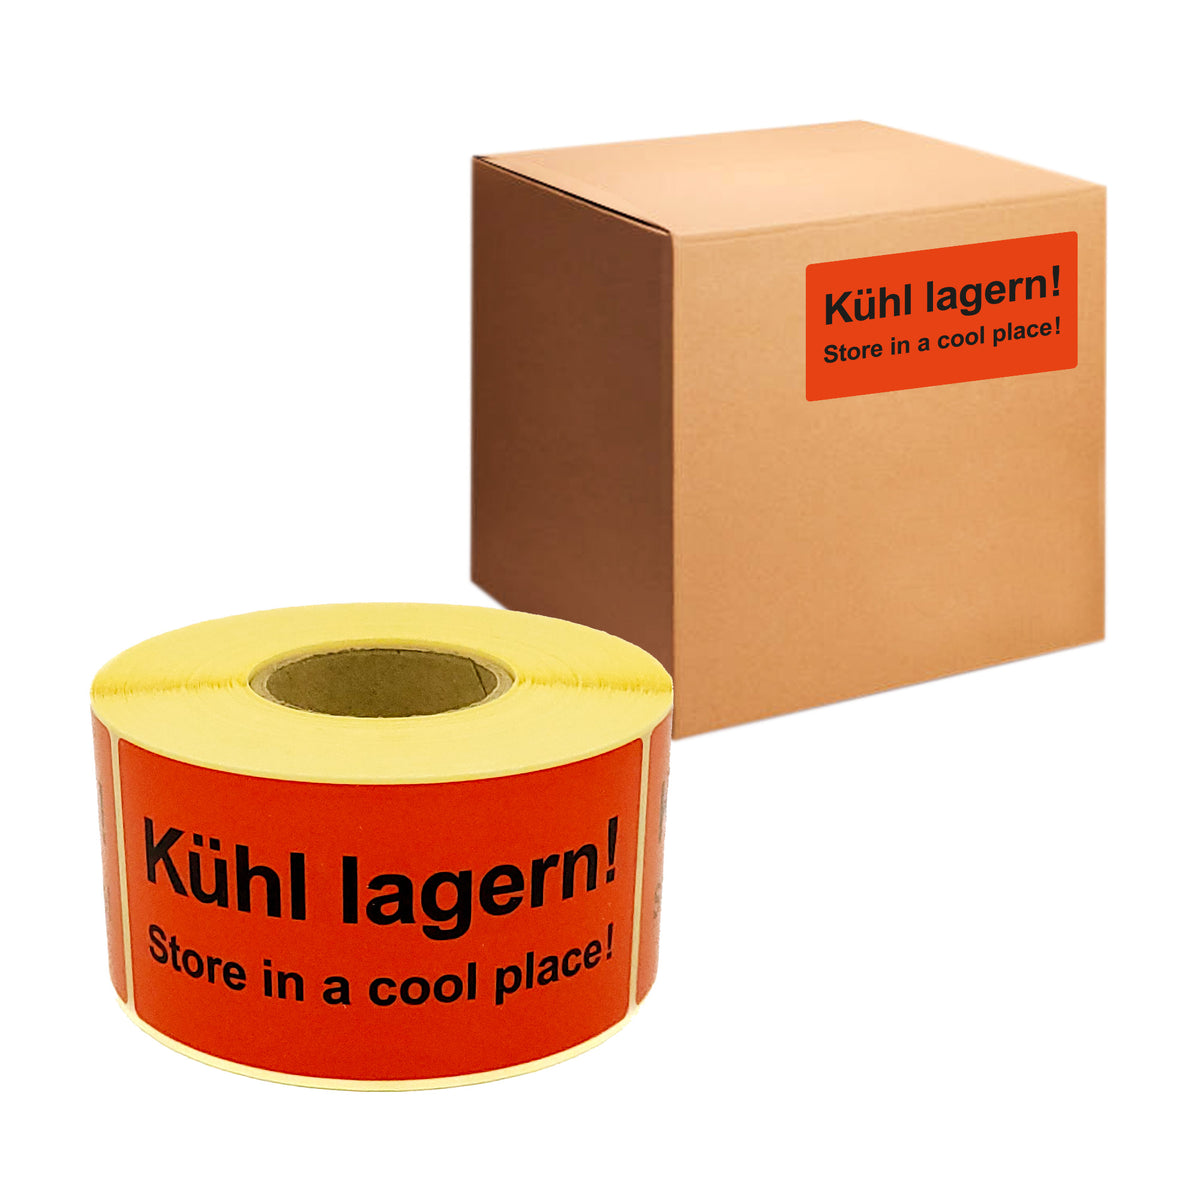 Warning Labels on Roll 100 x 50 mm- Kühl lagern! Store in a cool place! 500 pcs